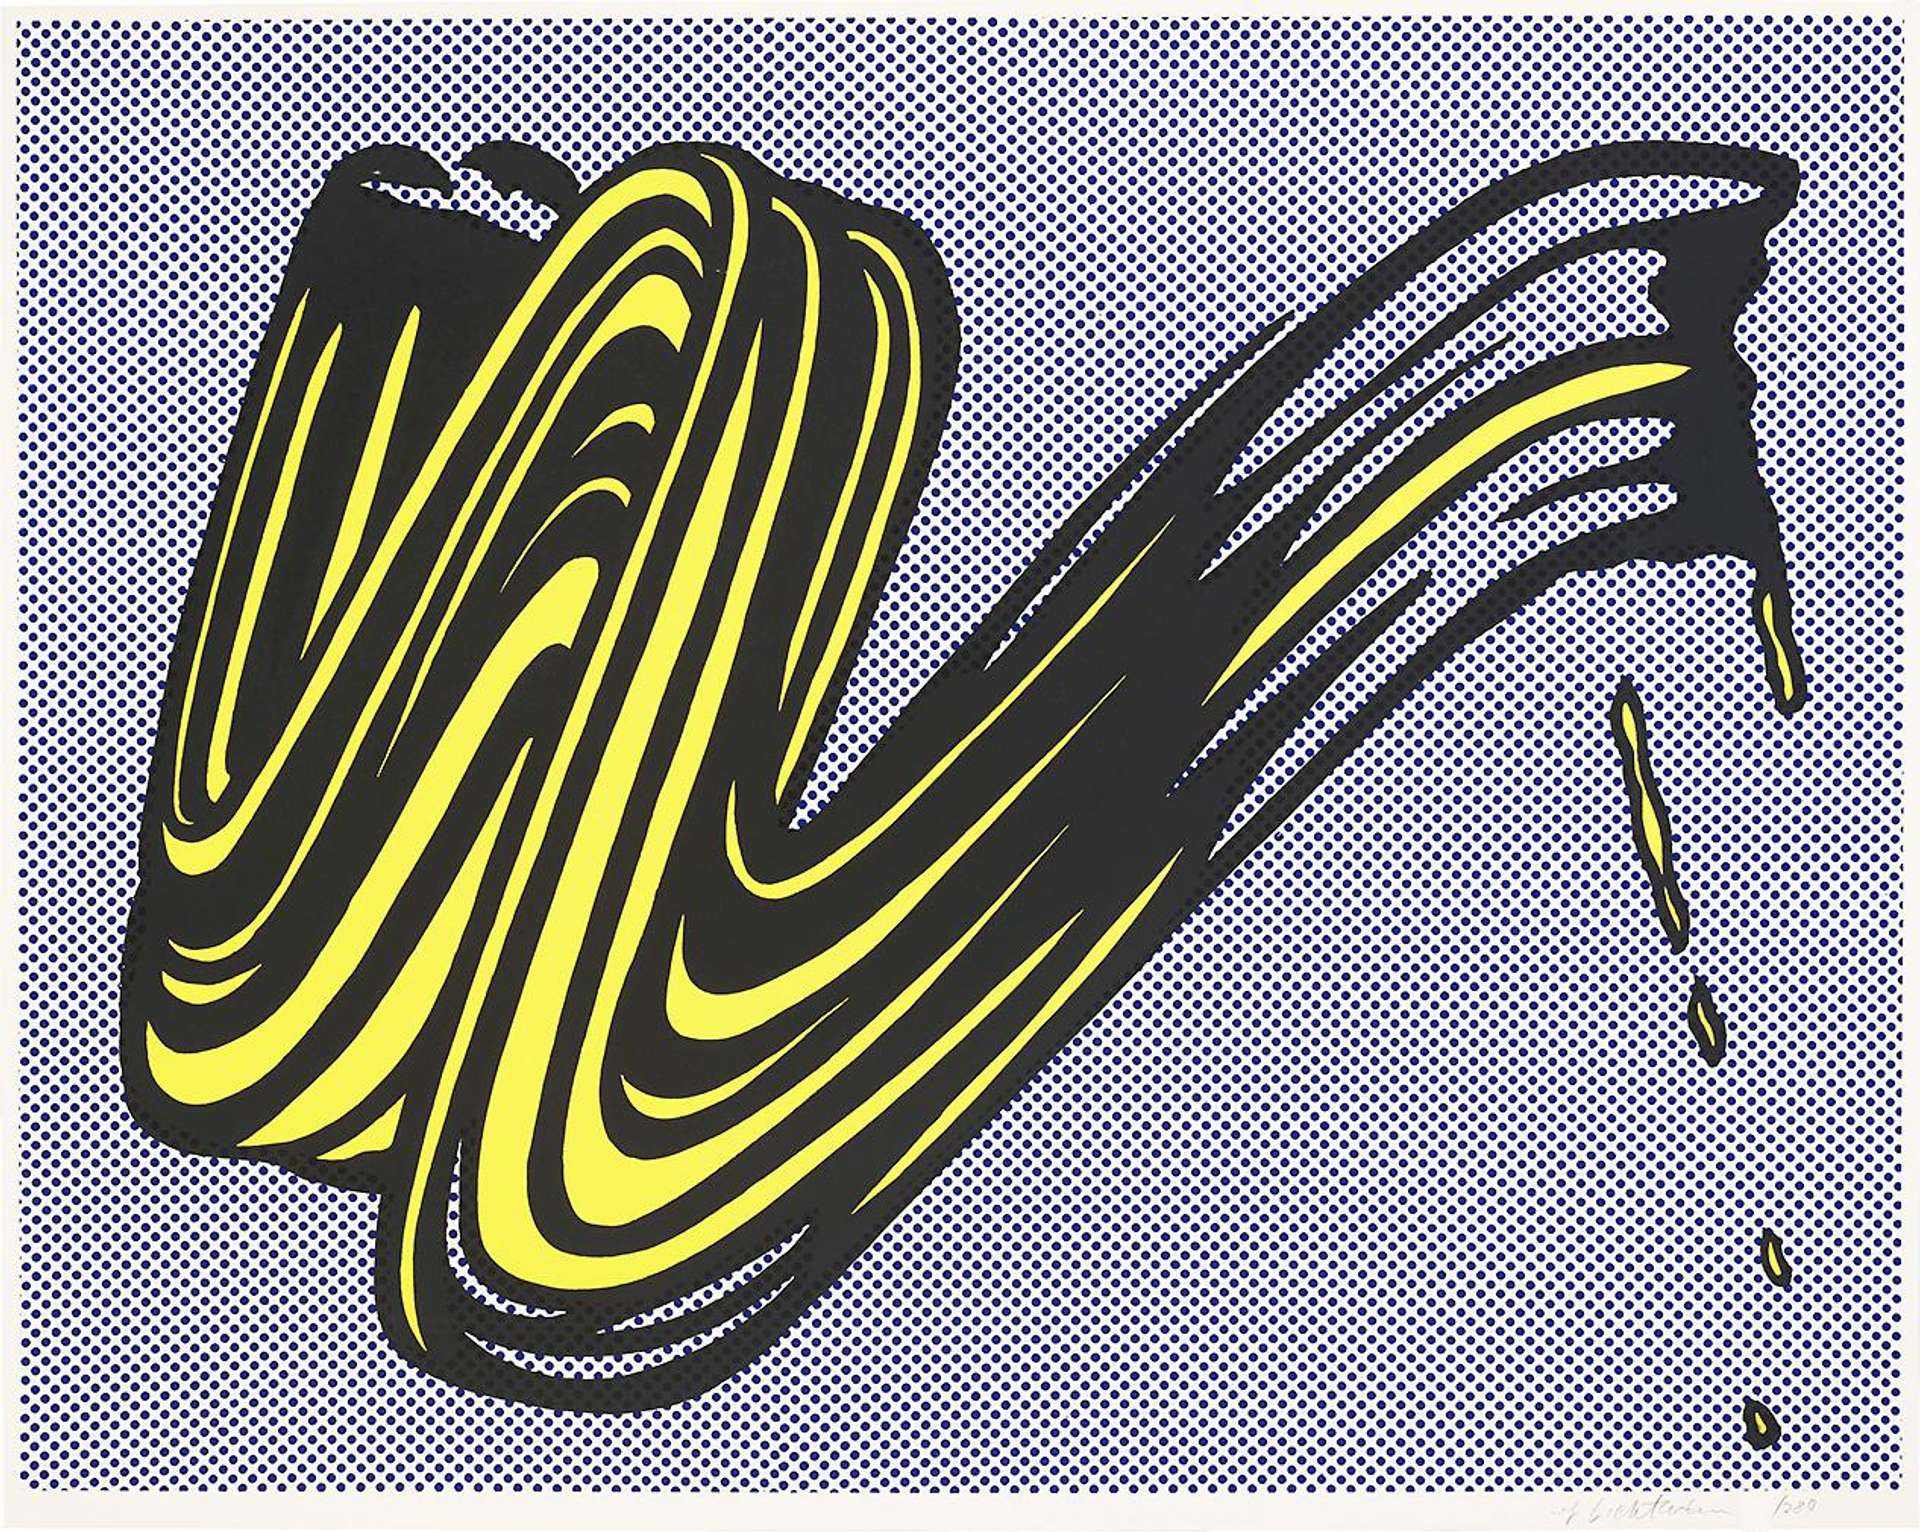 Lichtenstein centers his enlarged bright yellow brushstroke on a background composed of blue and white Ben Day dots. The flattened sporadic drips and splatters, and the trailing outlines defining the brushstroke add tone and dimension to the composition. At first glance, Lichtenstein’s brushstroke rendition appears to be devoid of explicit motion. Yet, the bold shadows resulting from the contours hold inherent suggestions of movement.